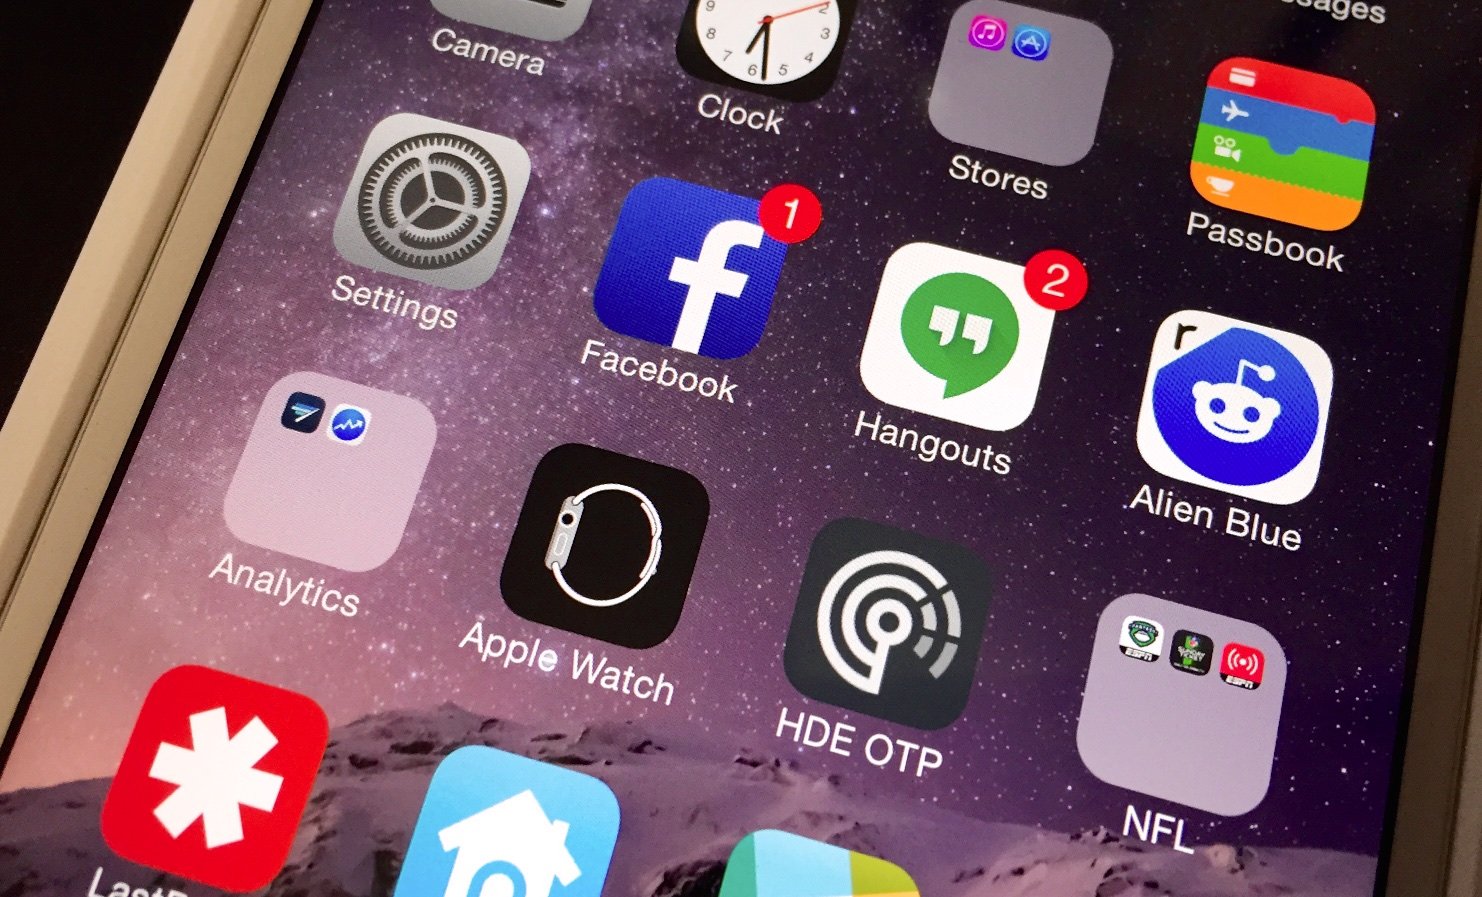 This is as close as you can get to deleting the Apple Watch app on iPhone.